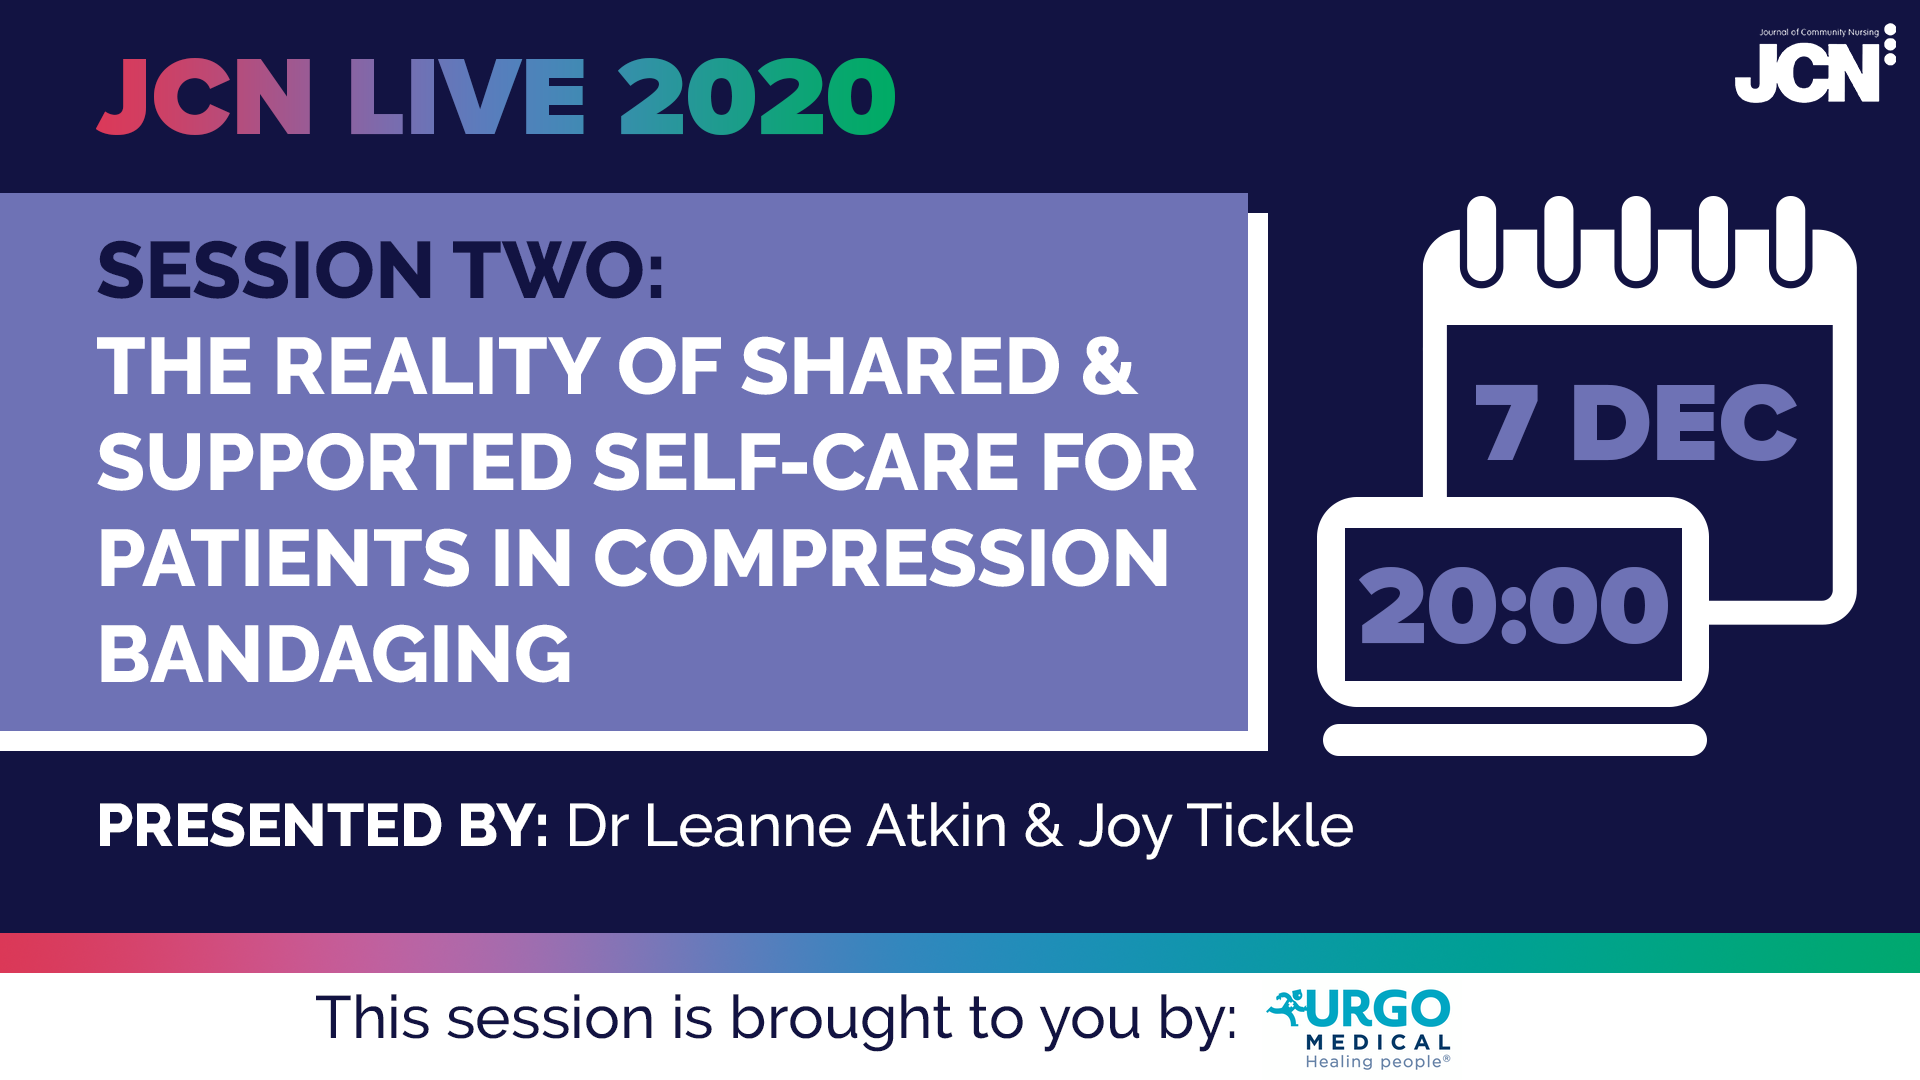 JCN LIVE 2020 - THE REALITY OF SHARED & SUPPORTED SELF-CARE FOR PATIENTS IN COMPRESSION BANDAGING